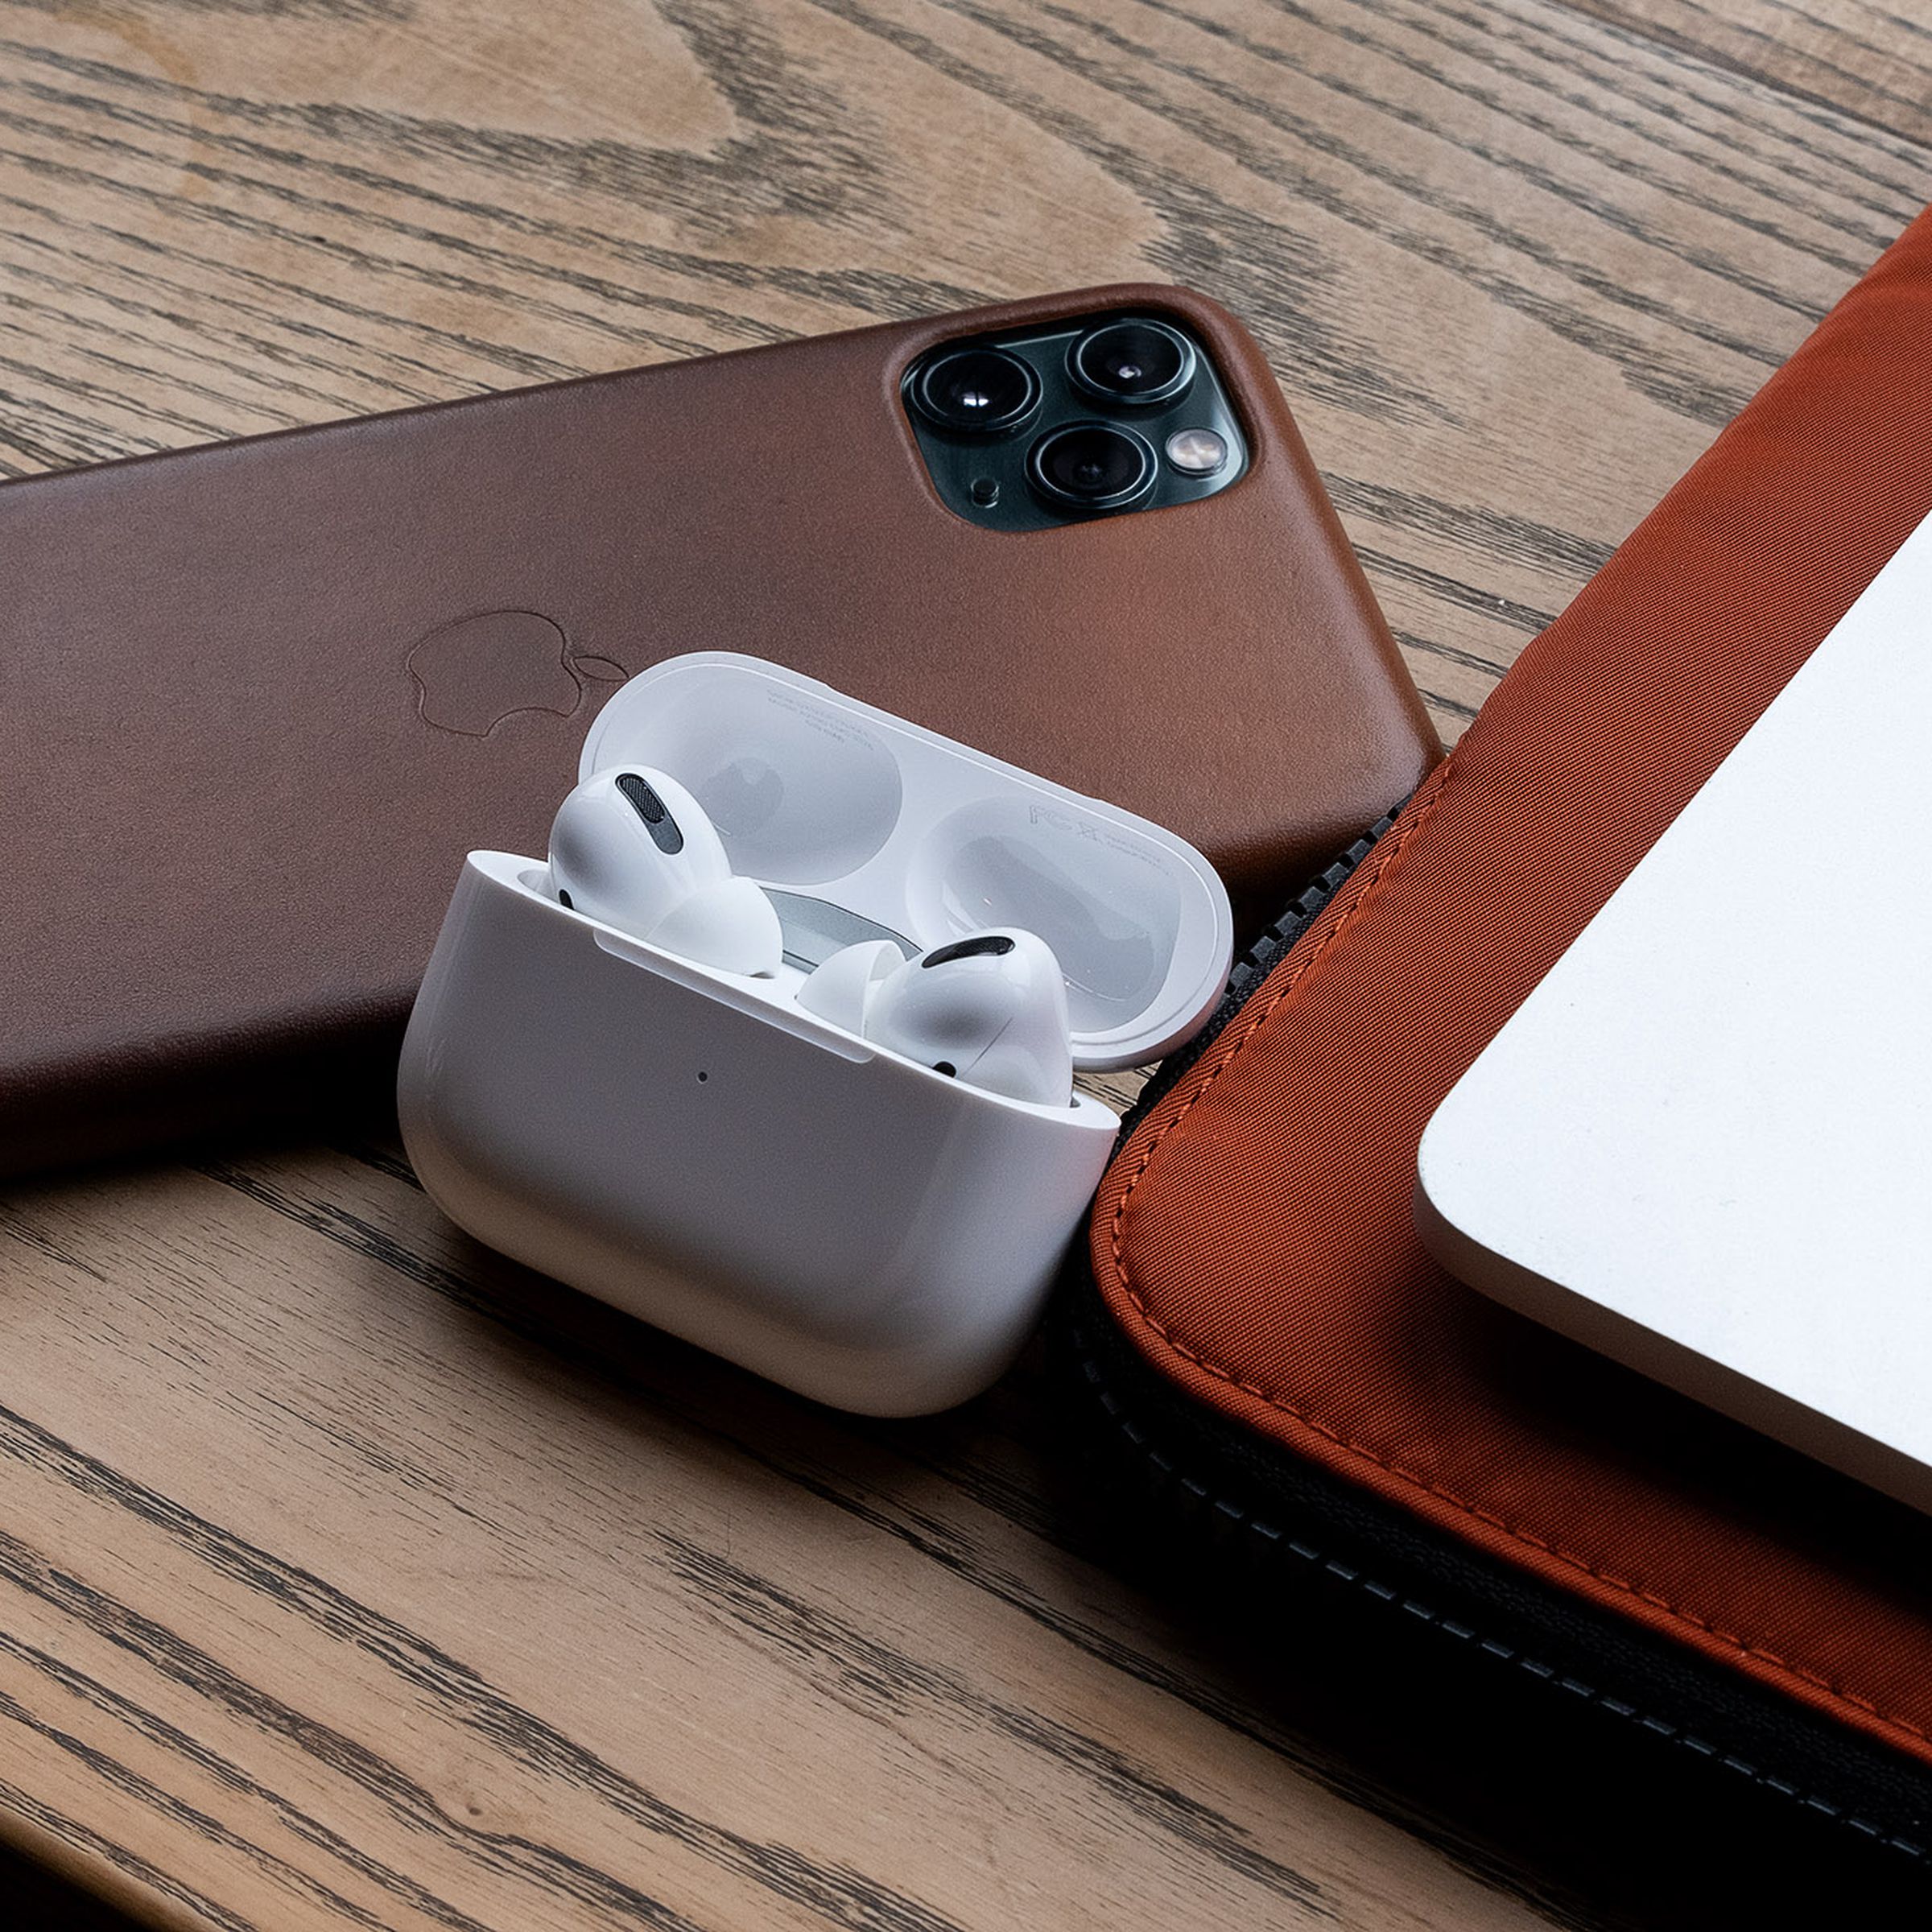 The AirPods Pro, the best wireless earbuds for people who use Apple products, pictured next to an iPhone 11 Pro Max and MacBook Pro.